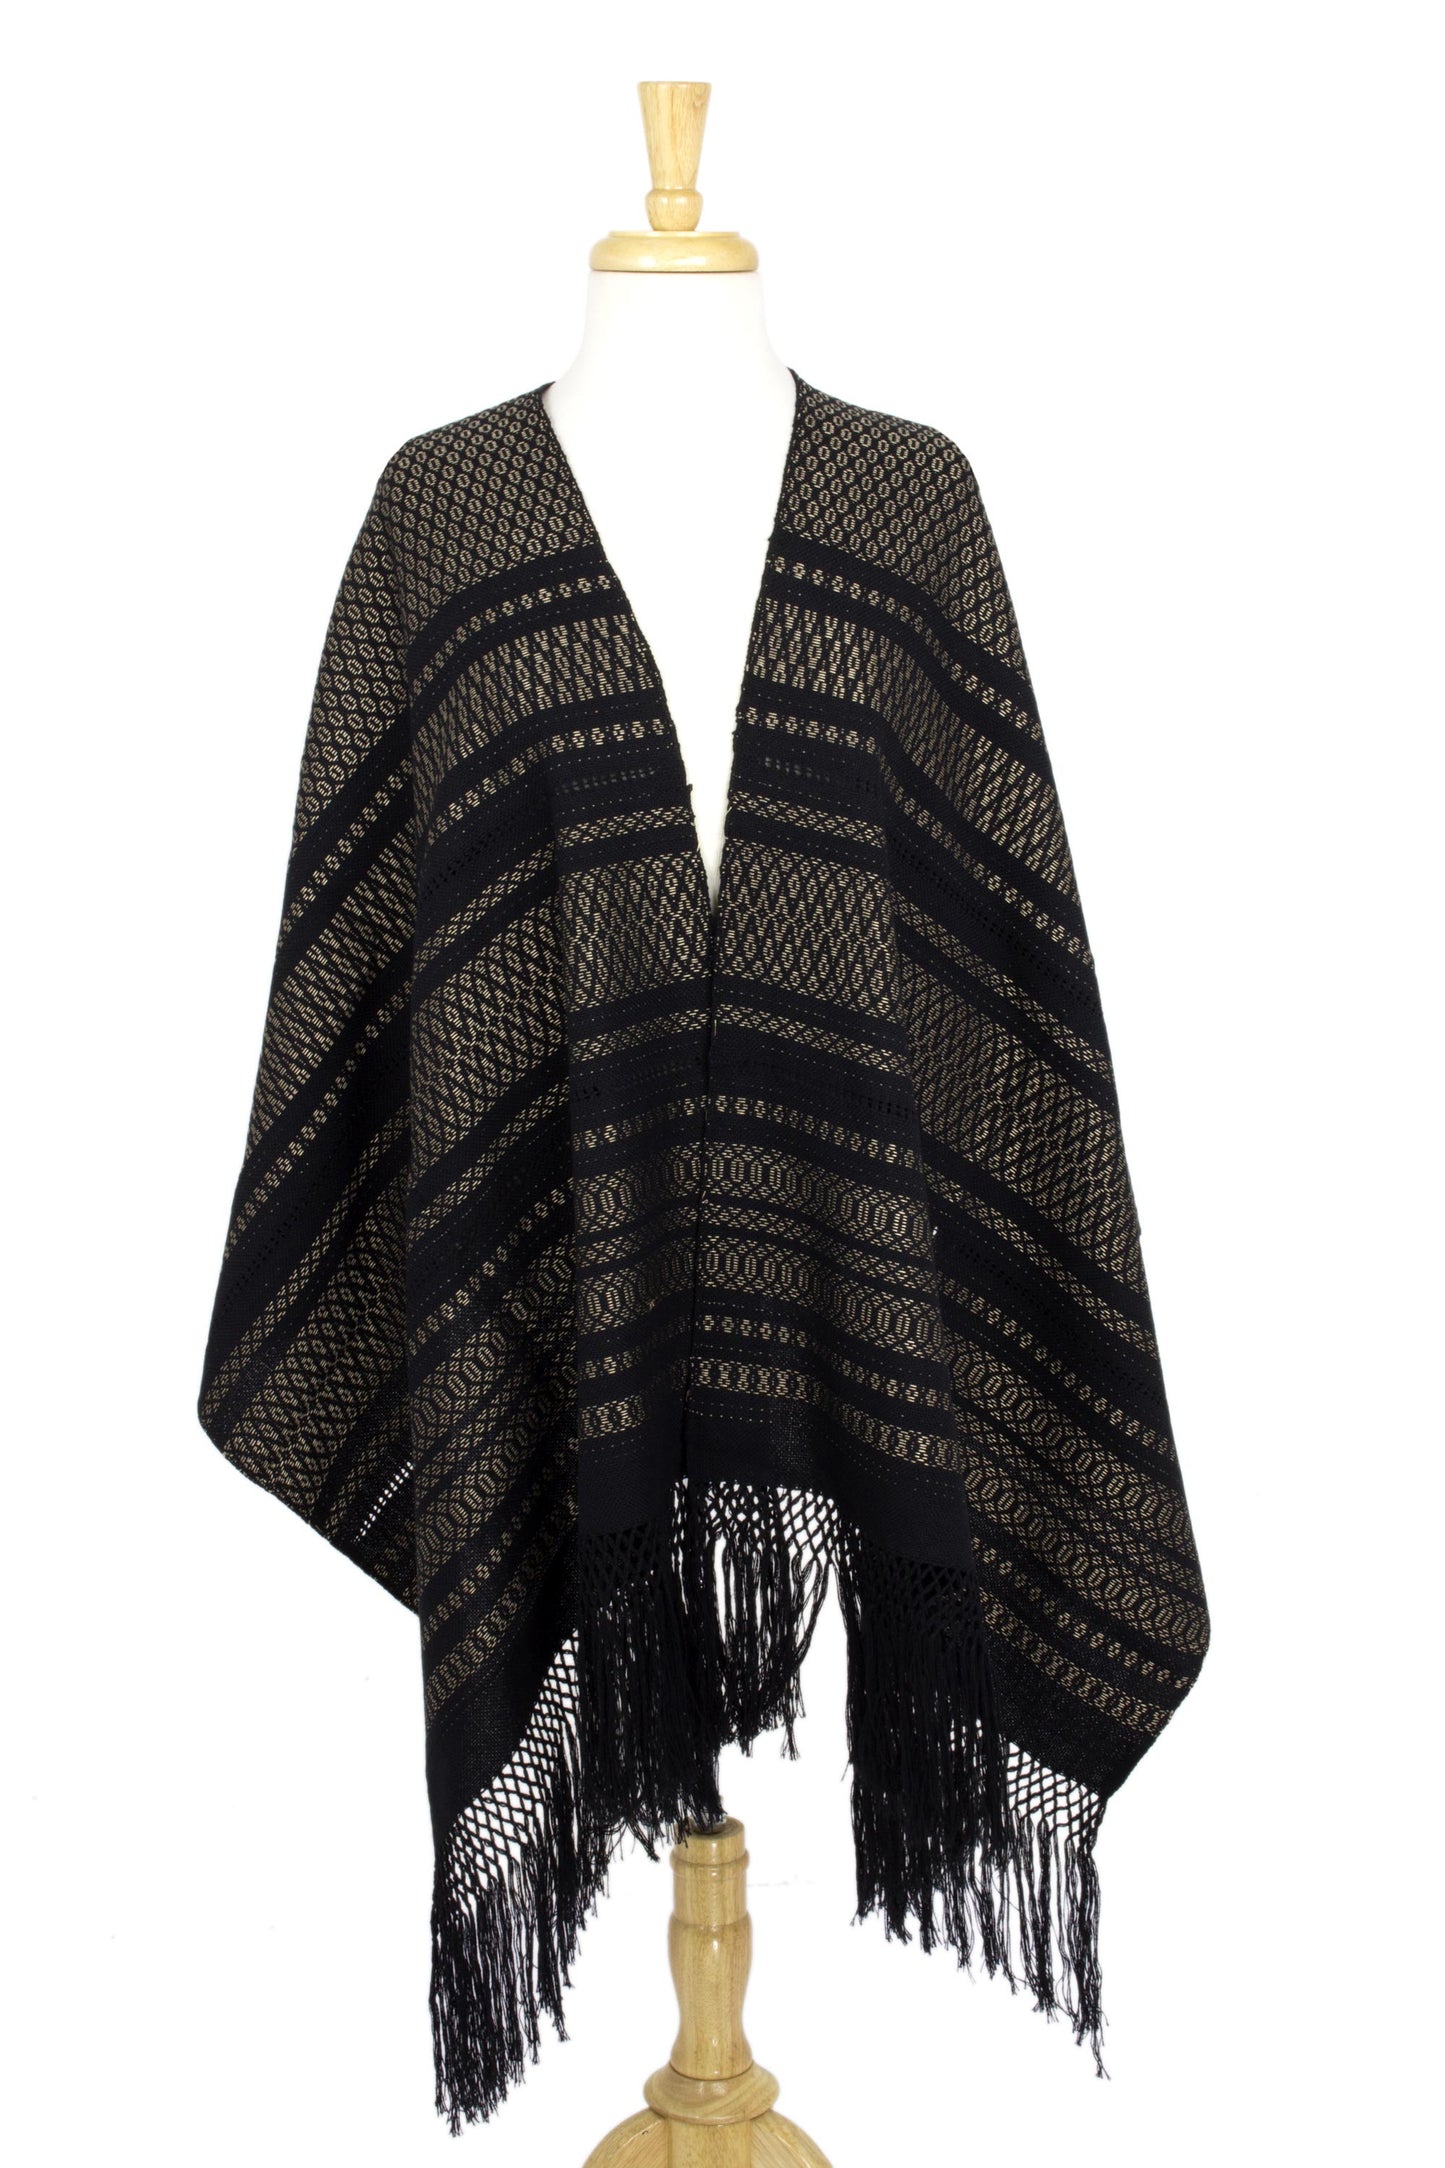 'Night of Golden Stars' Handwoven Black Cotton Rebozo Shawl with Golden Accents